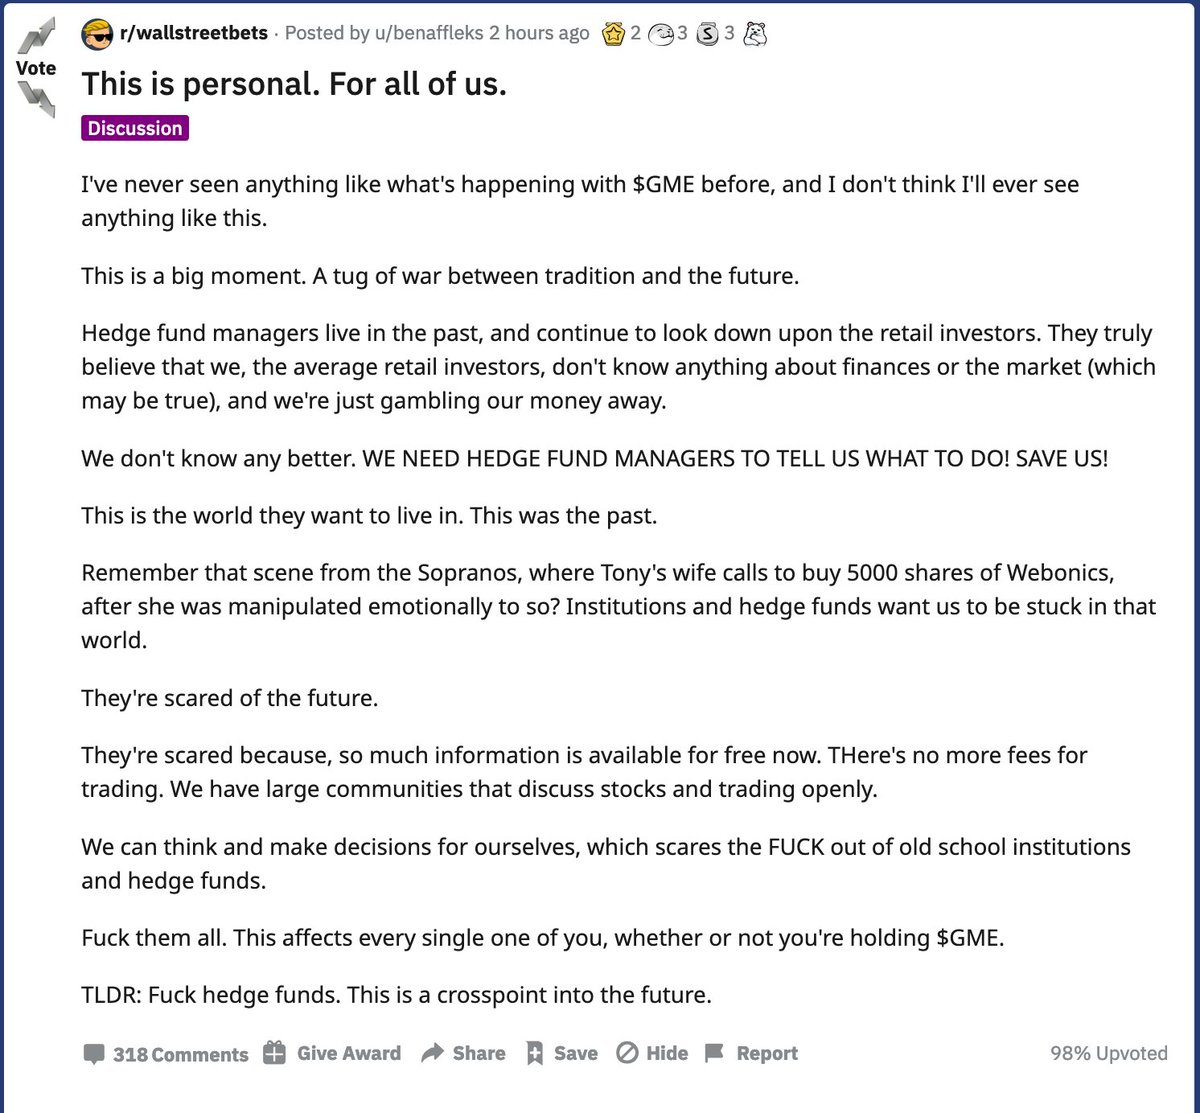 For any people/journalists trying to understand the  $GME situation, read this top post from /r/WallStreetBets. It explains, very well, what is happening & why.